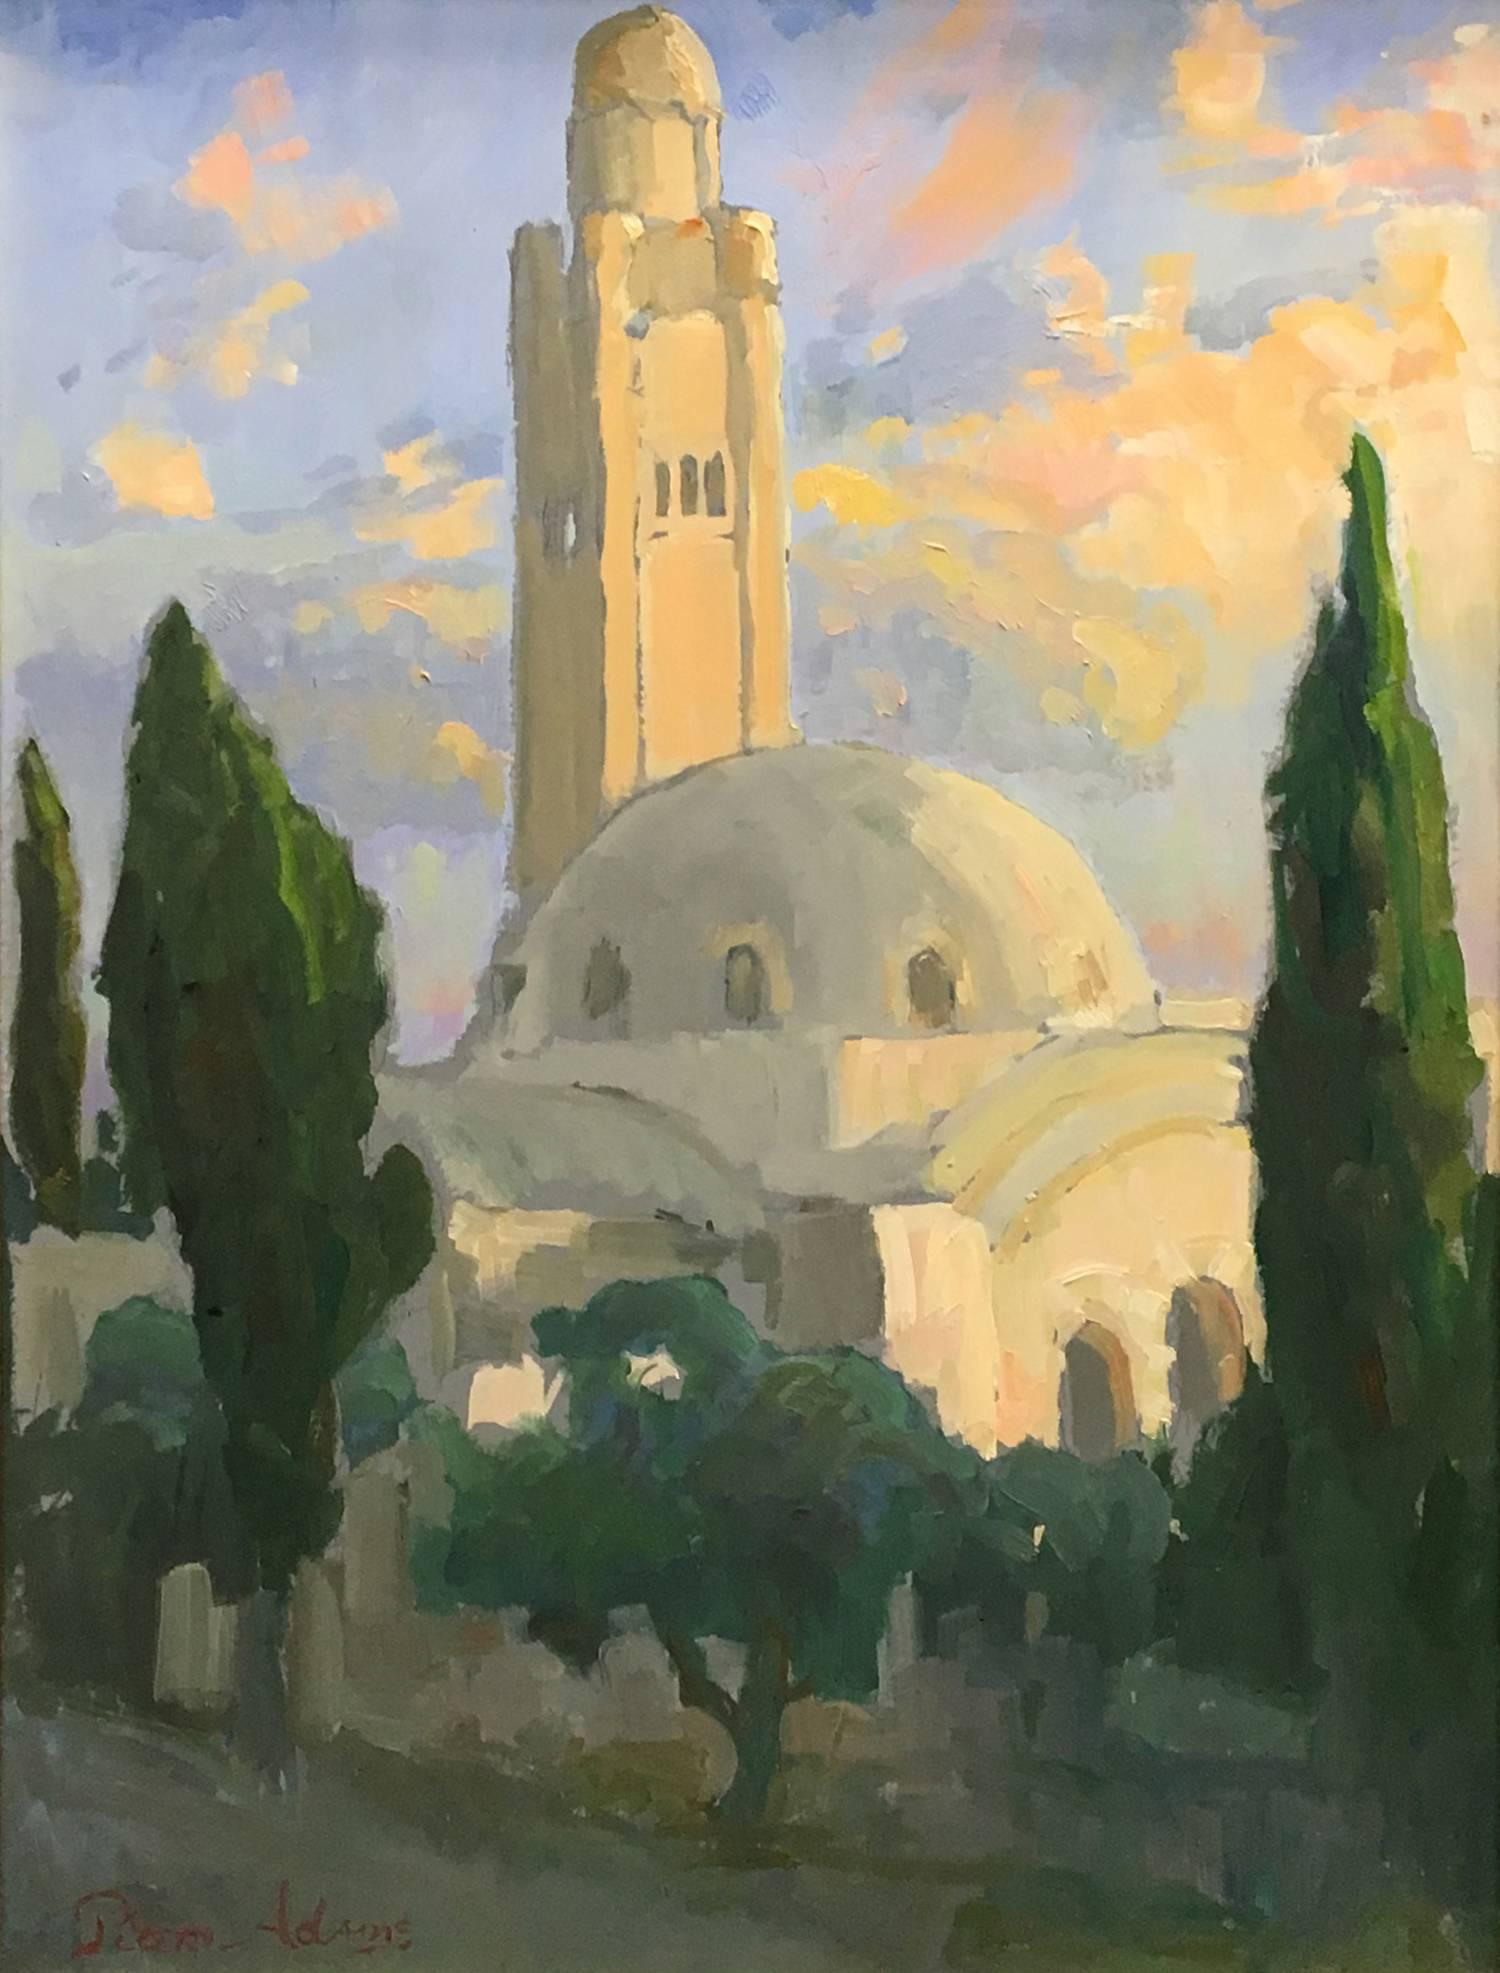 The Jerusalem International YMCA Tower and Concert Hall - Painting by Peter Adams